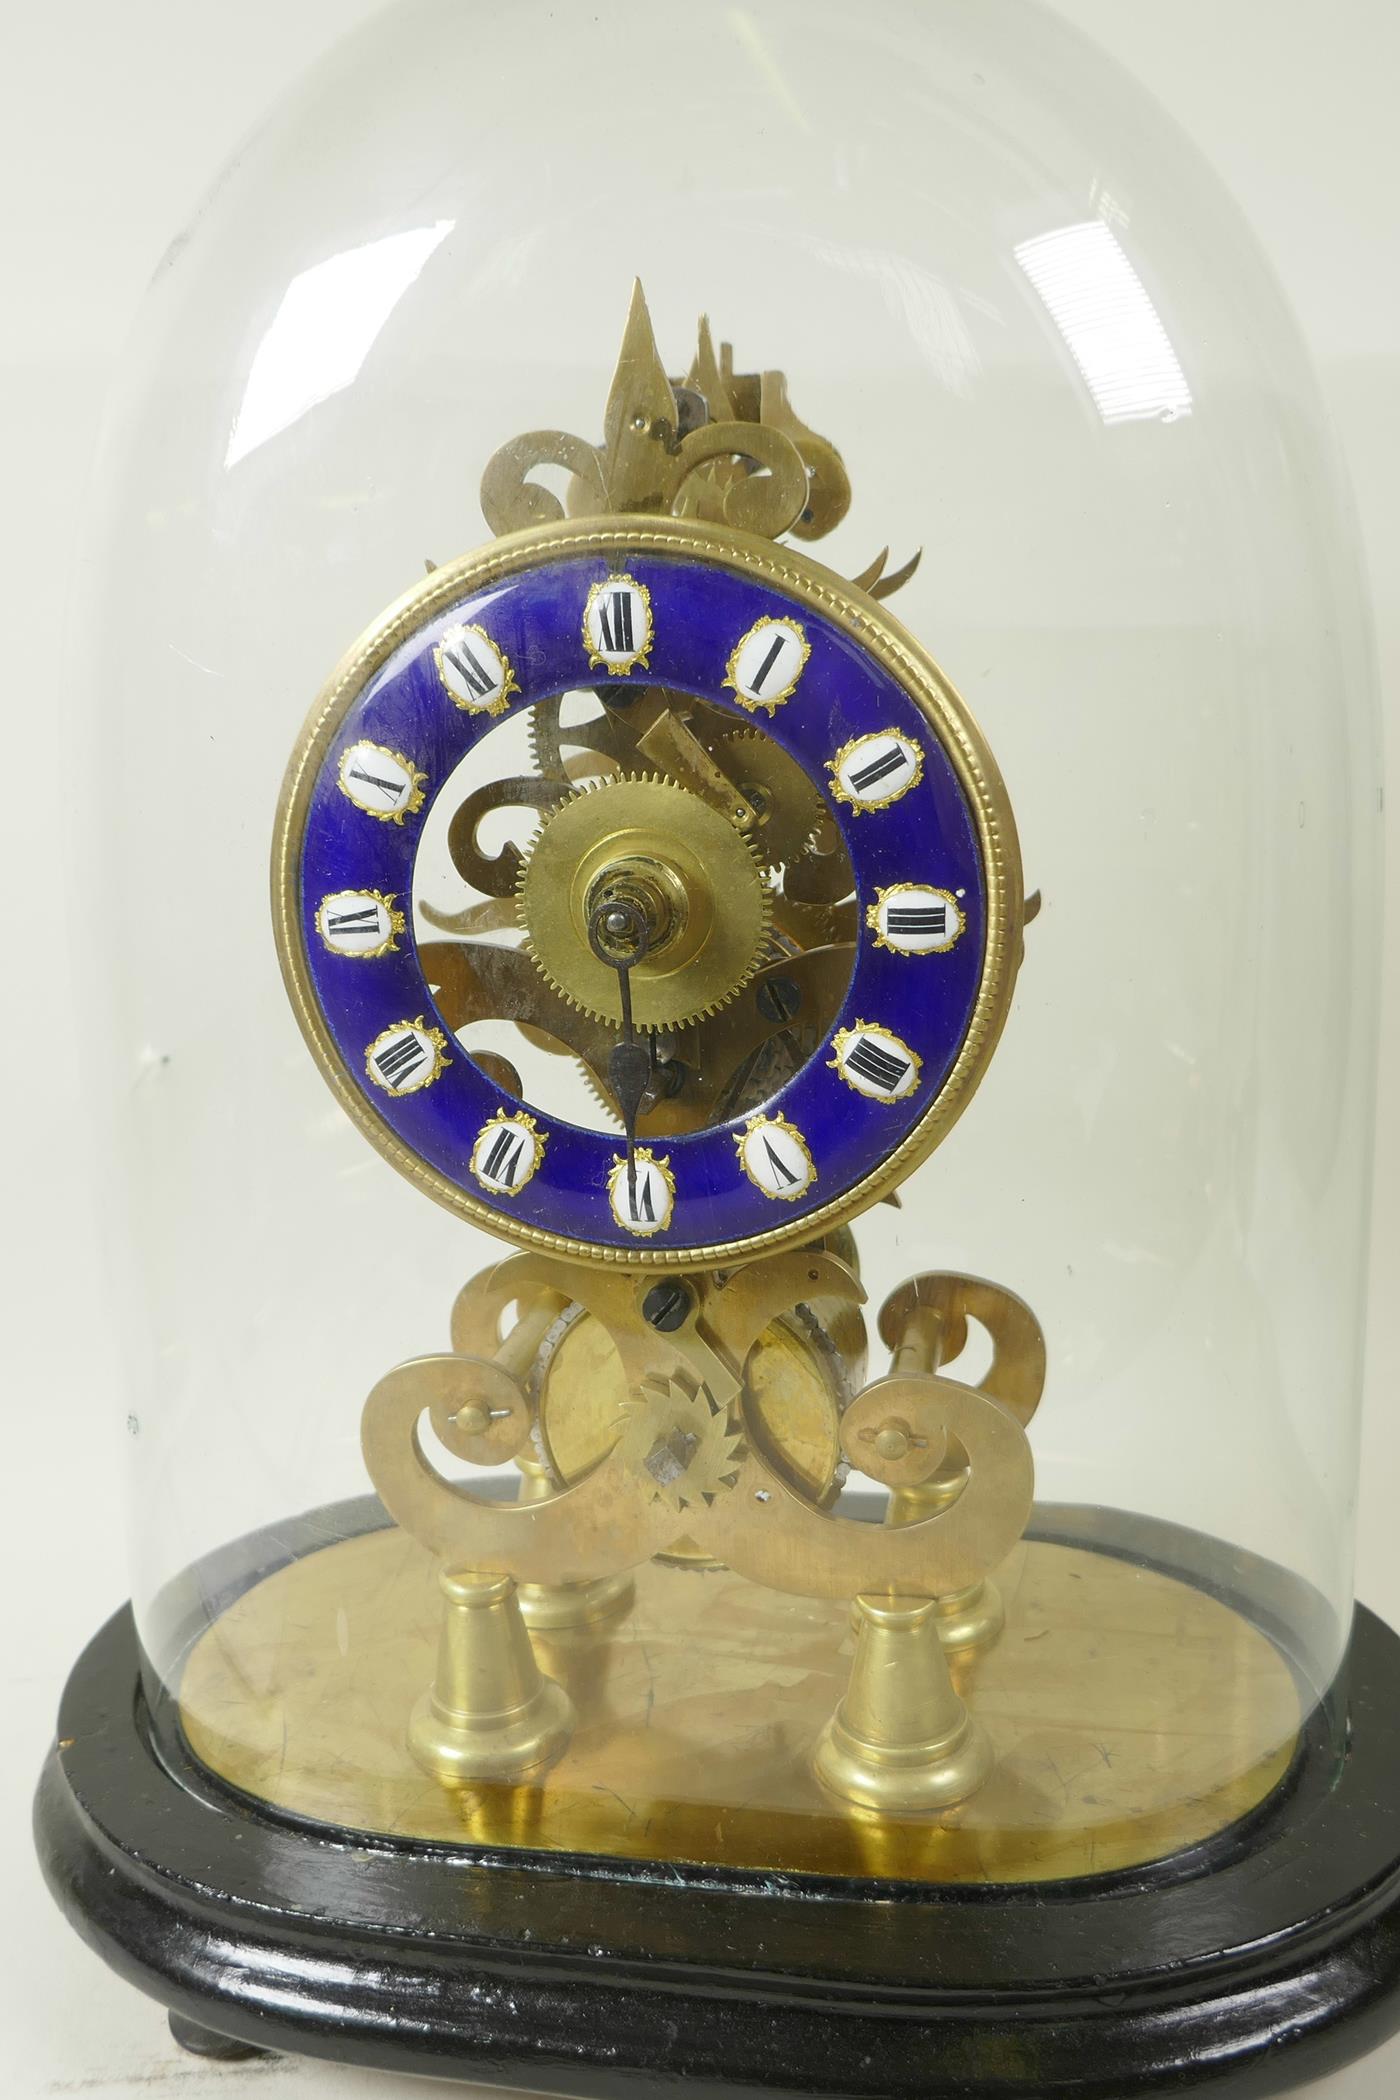 A replica brass skeleton clock with fusee movement and blue enamel chapter ring in Roman numerals, - Image 2 of 5